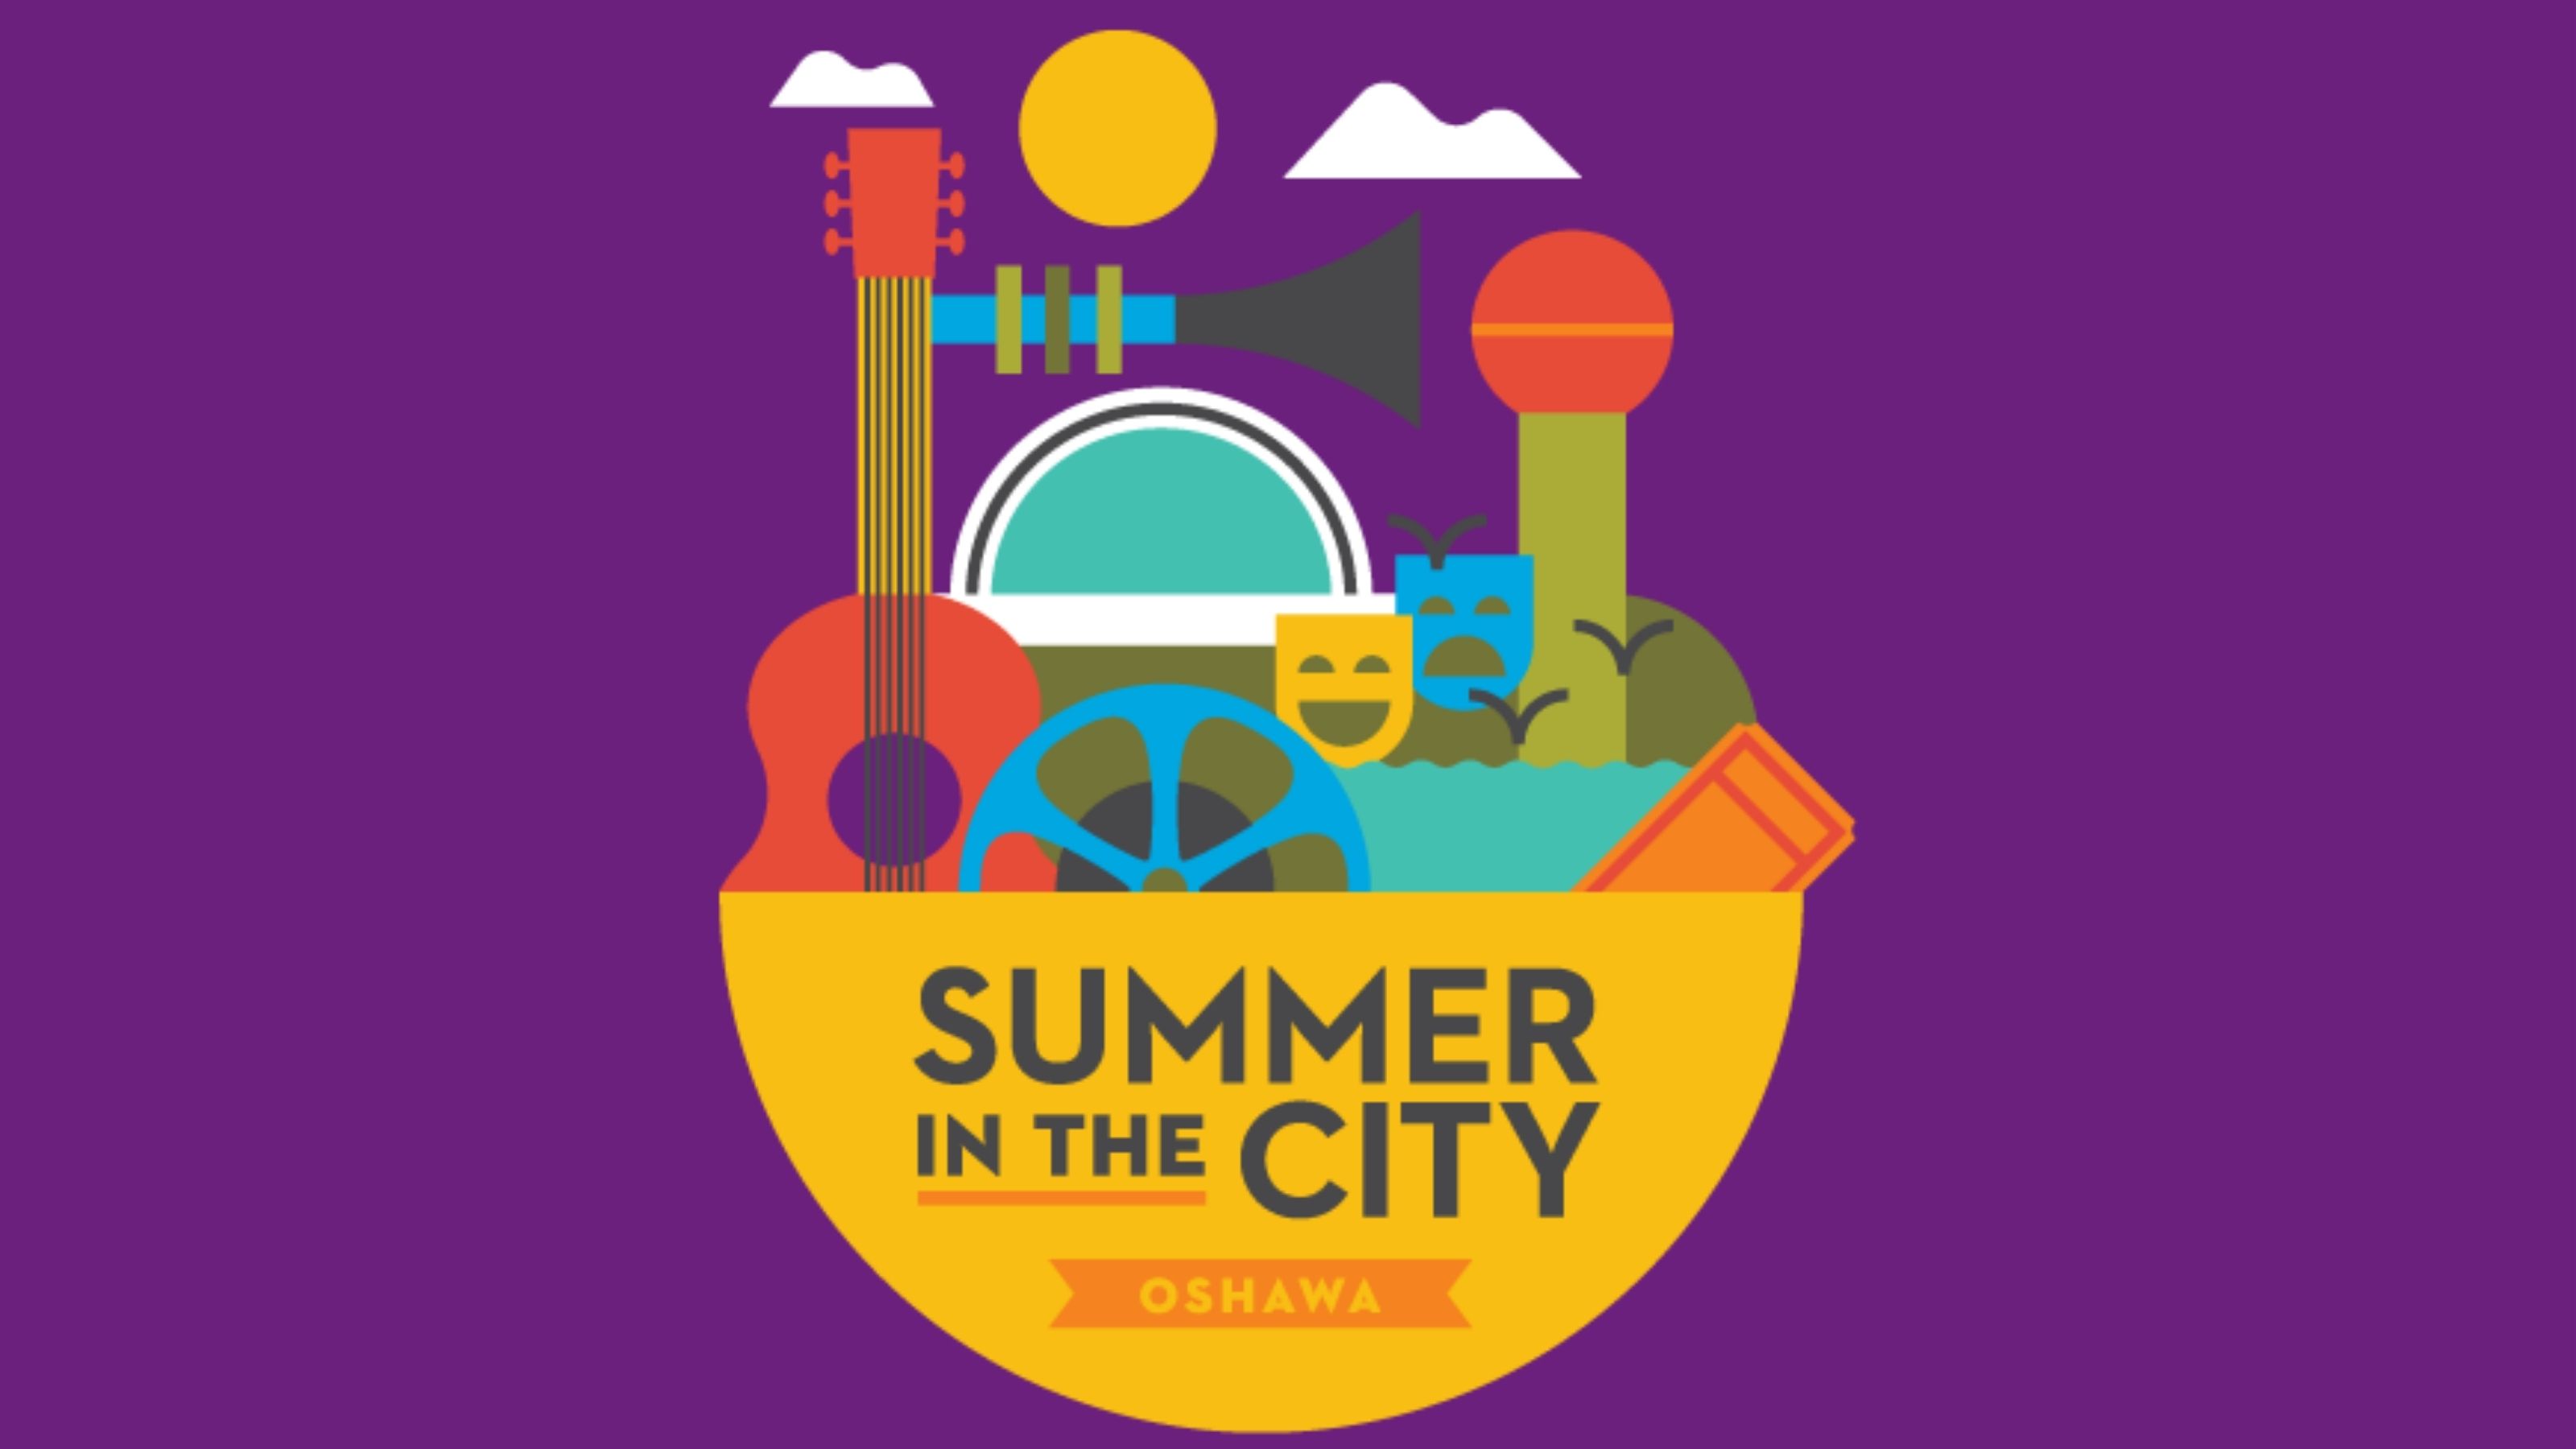 Summer in the City logo on a purple background with musical graphics